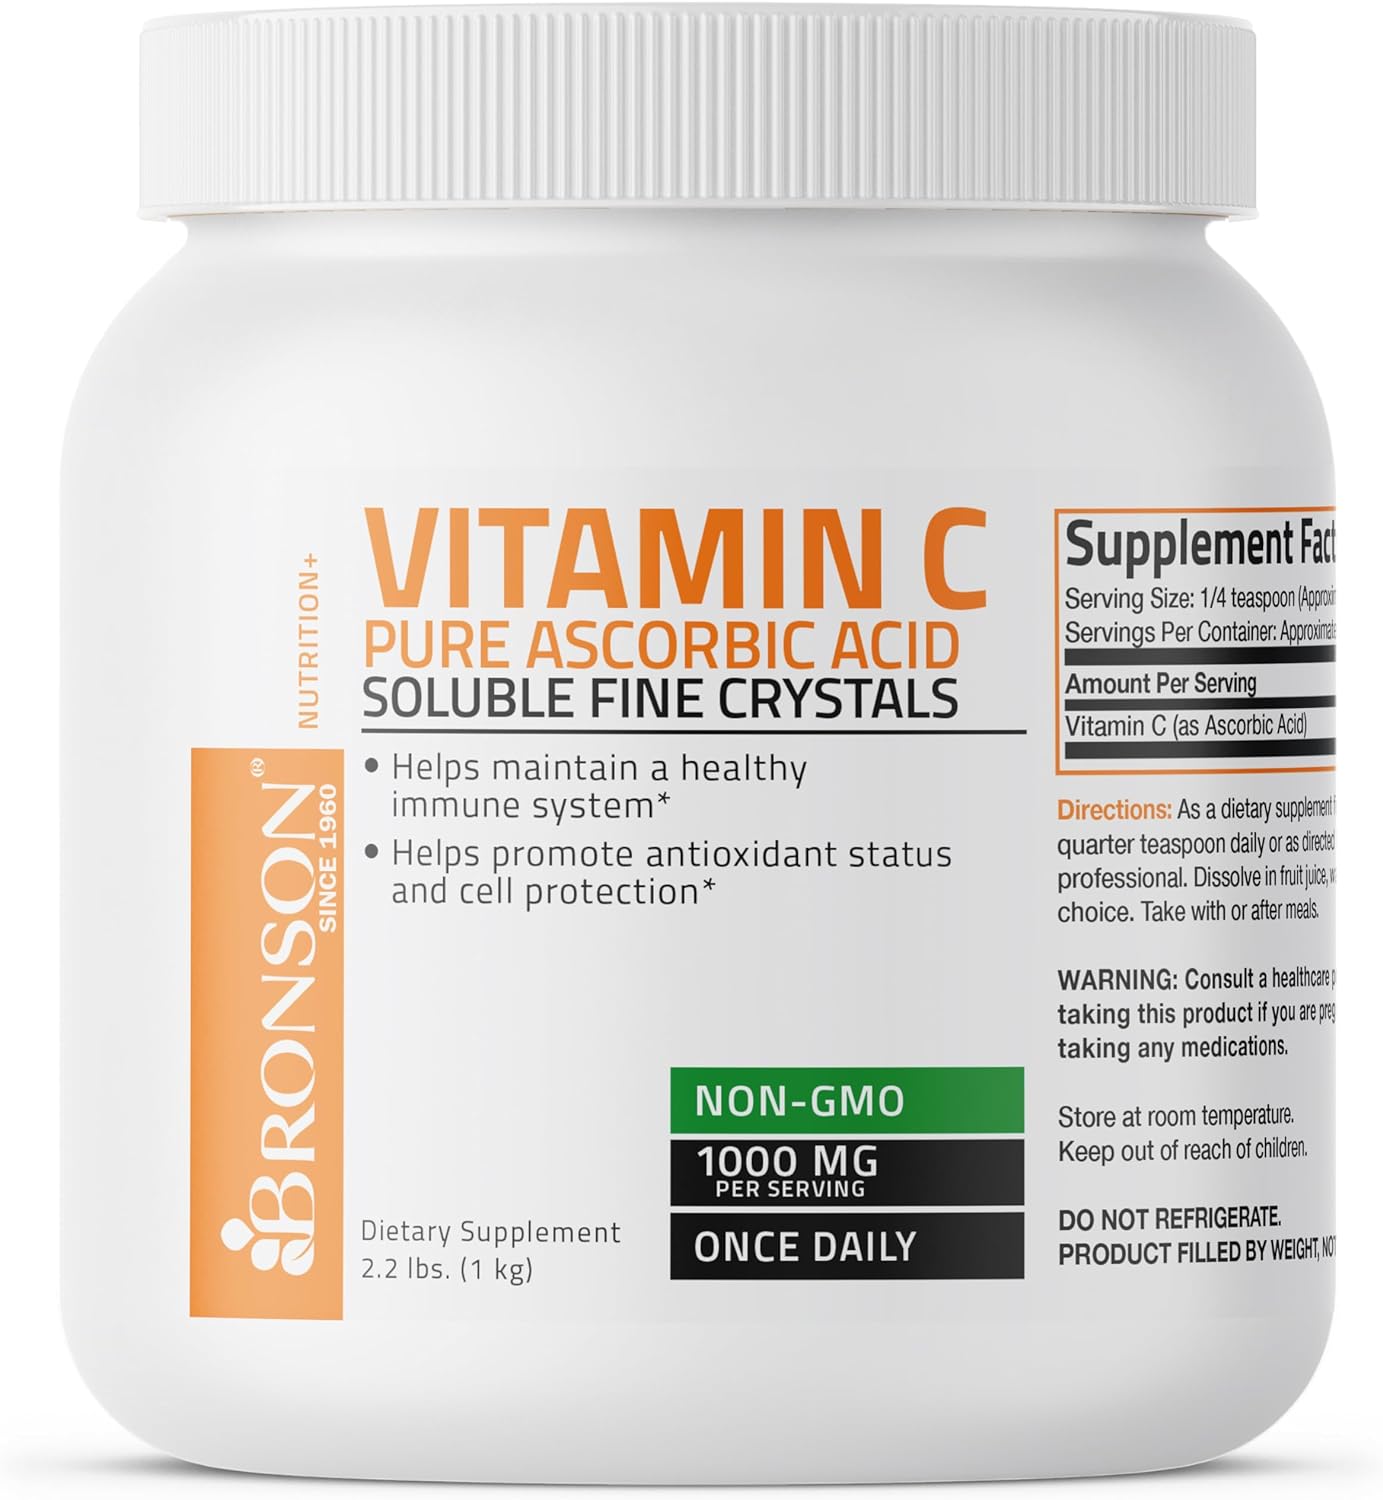 Vitamin C Powder Pure Ascorbic Acid Soluble Fine Non GMO Crystals ? Promotes Healthy Immune System and Cell Protection ? Powerful Antioxidant - 1 Kilogram (2.2 Lbs)